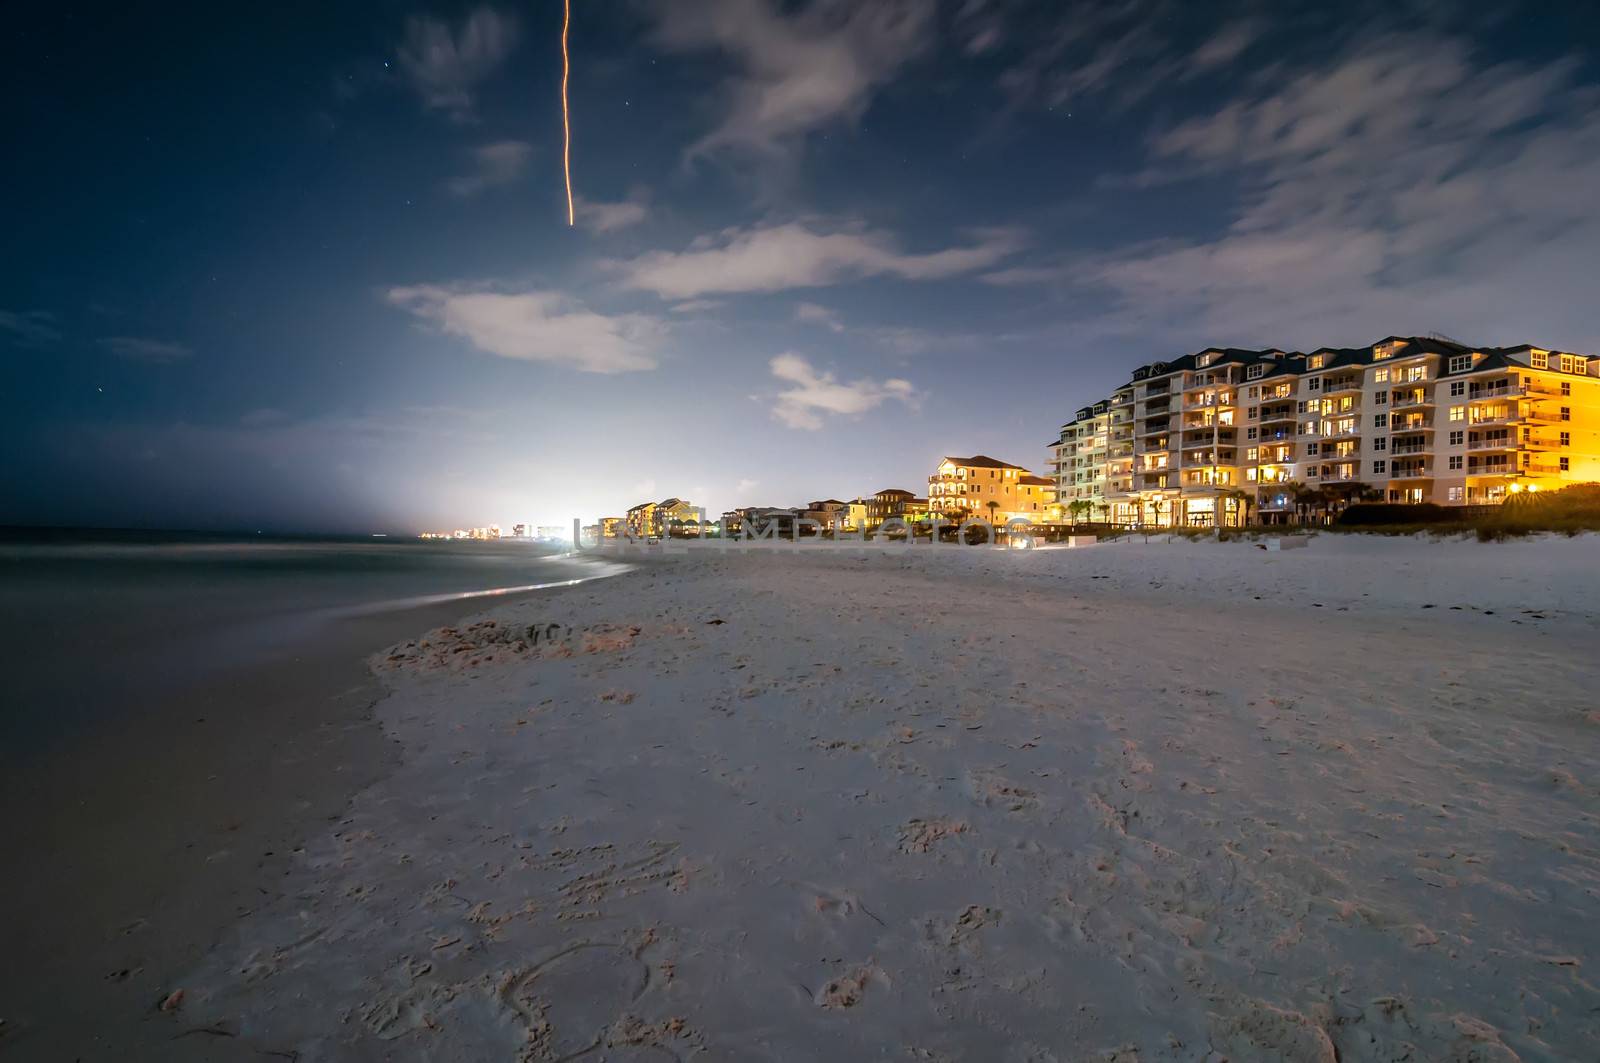 night scenes at the florida beach with super moon brightness